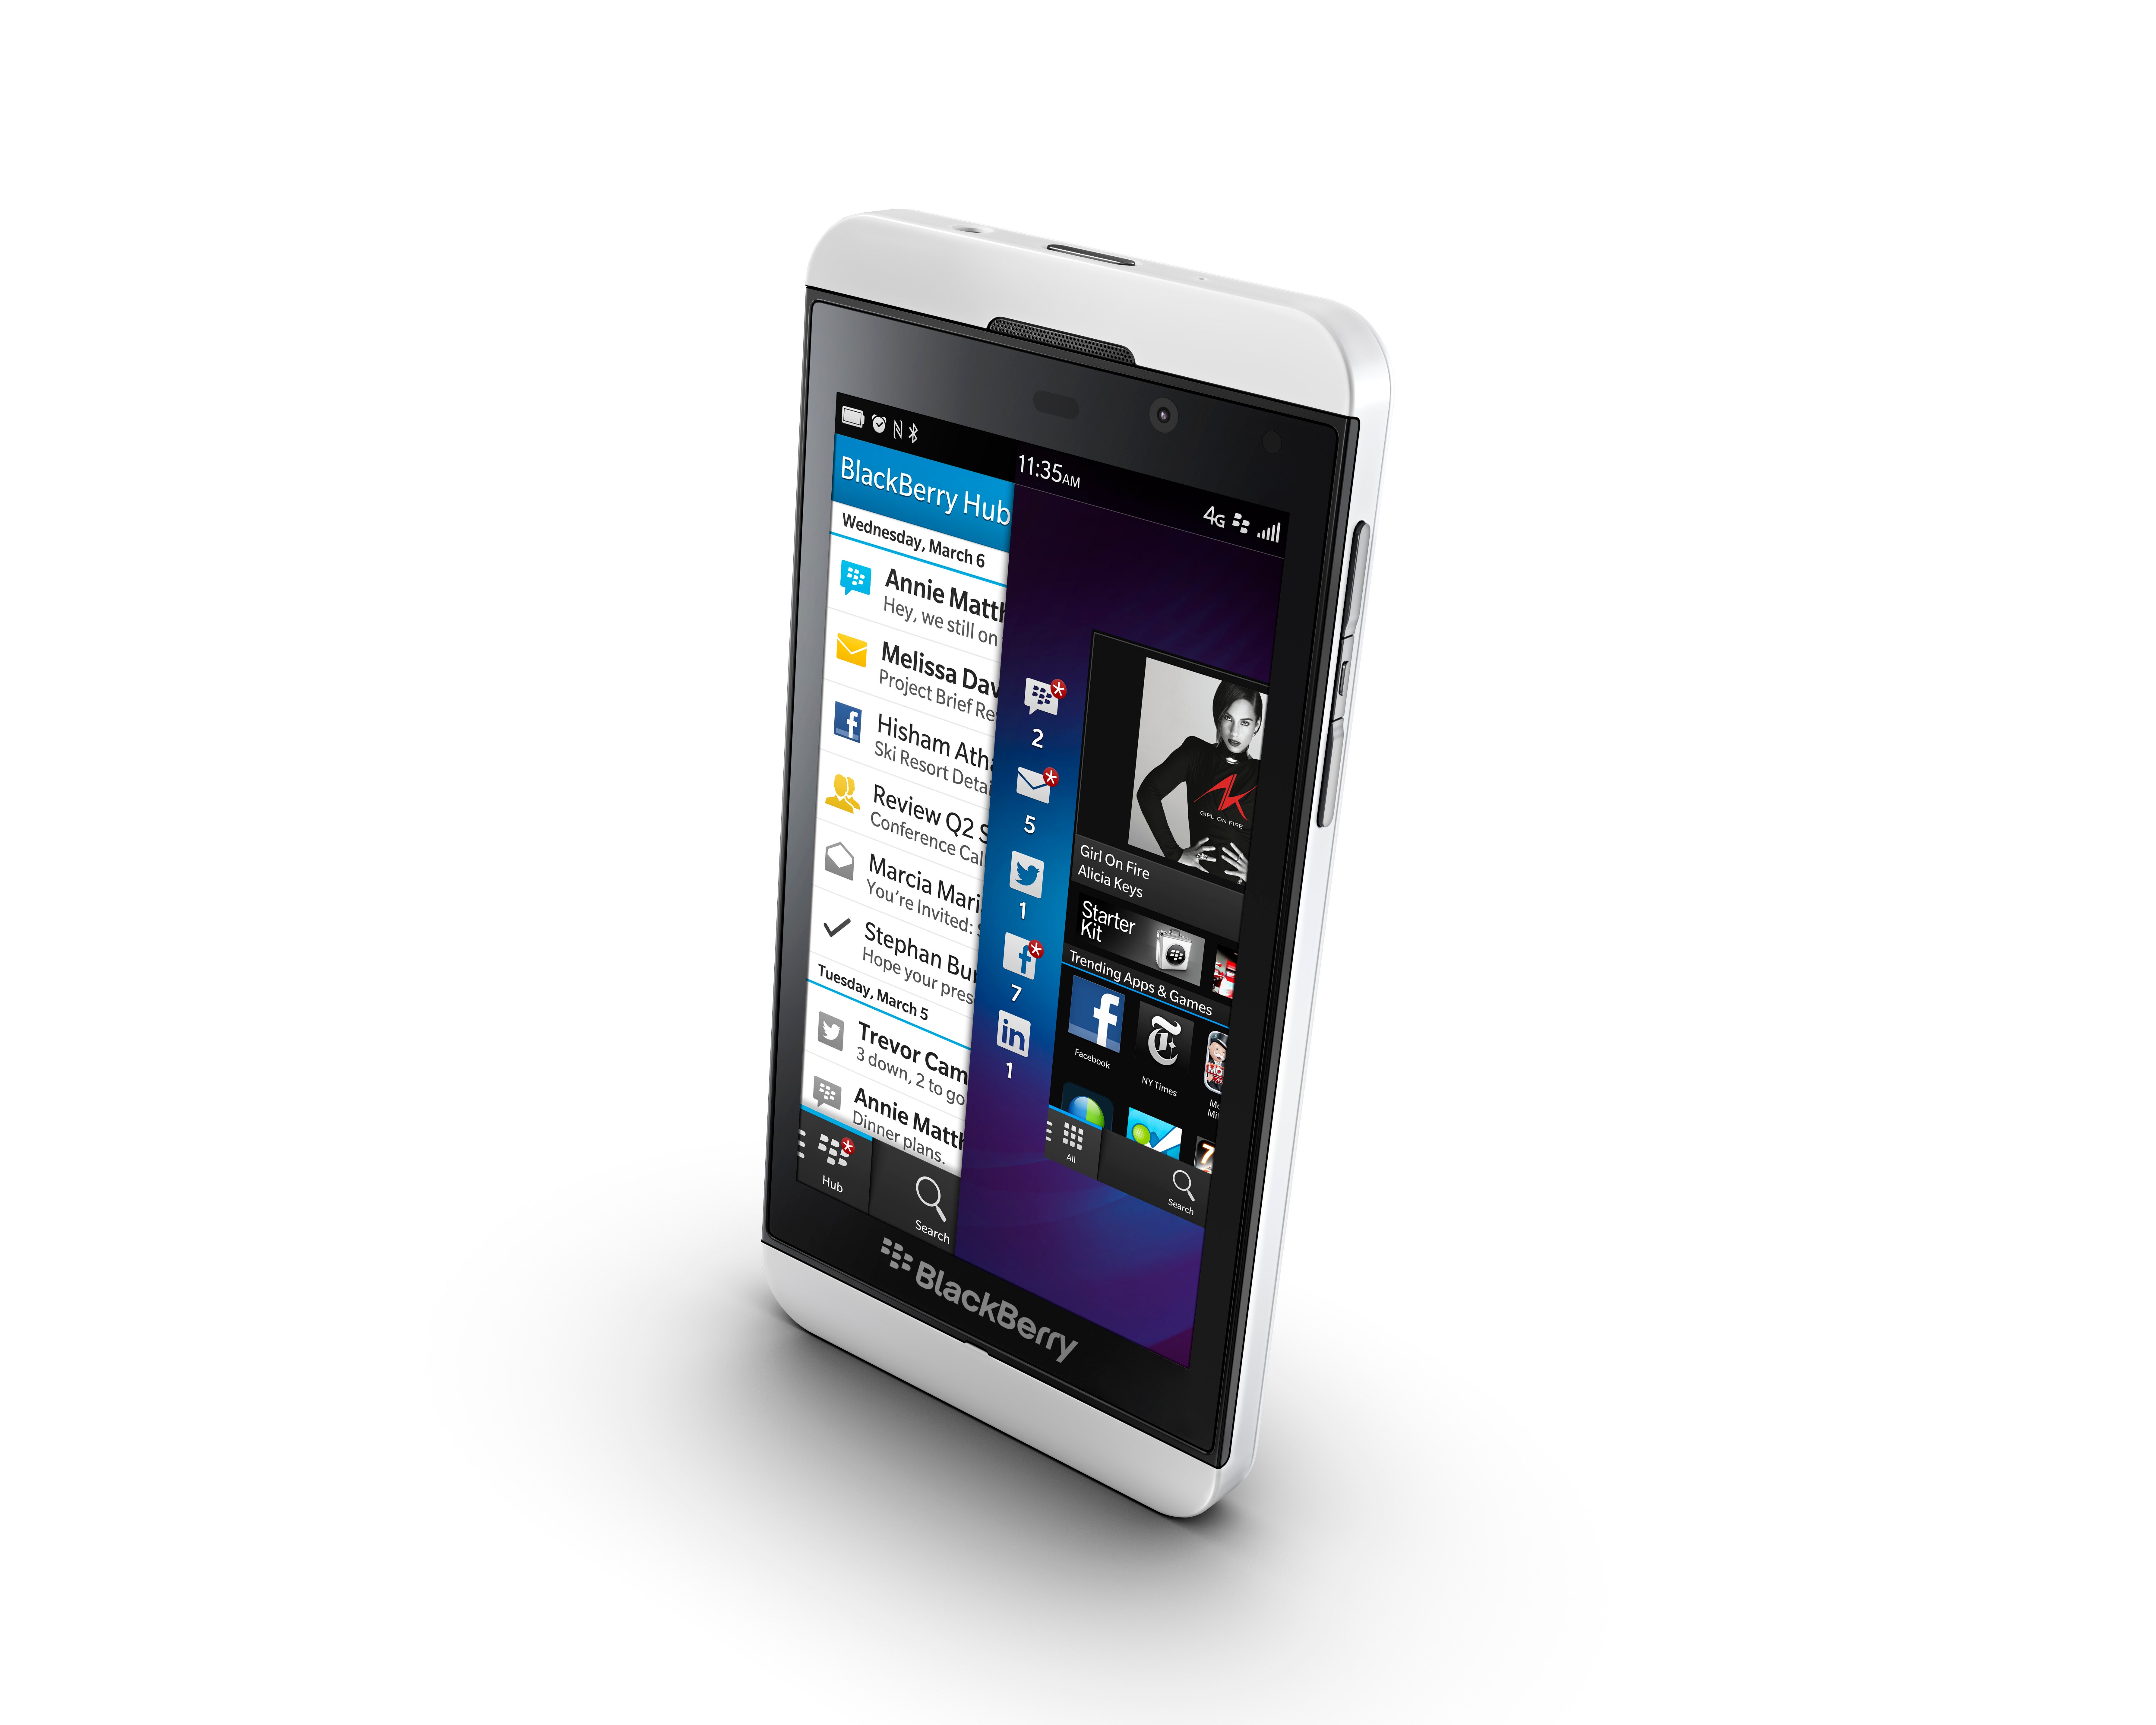 The BlackBerry Z10 is being bought by new BlackBerry buyers says CEO Heins - CEO Heins once again says BlackBerry Z10 sales above expectations